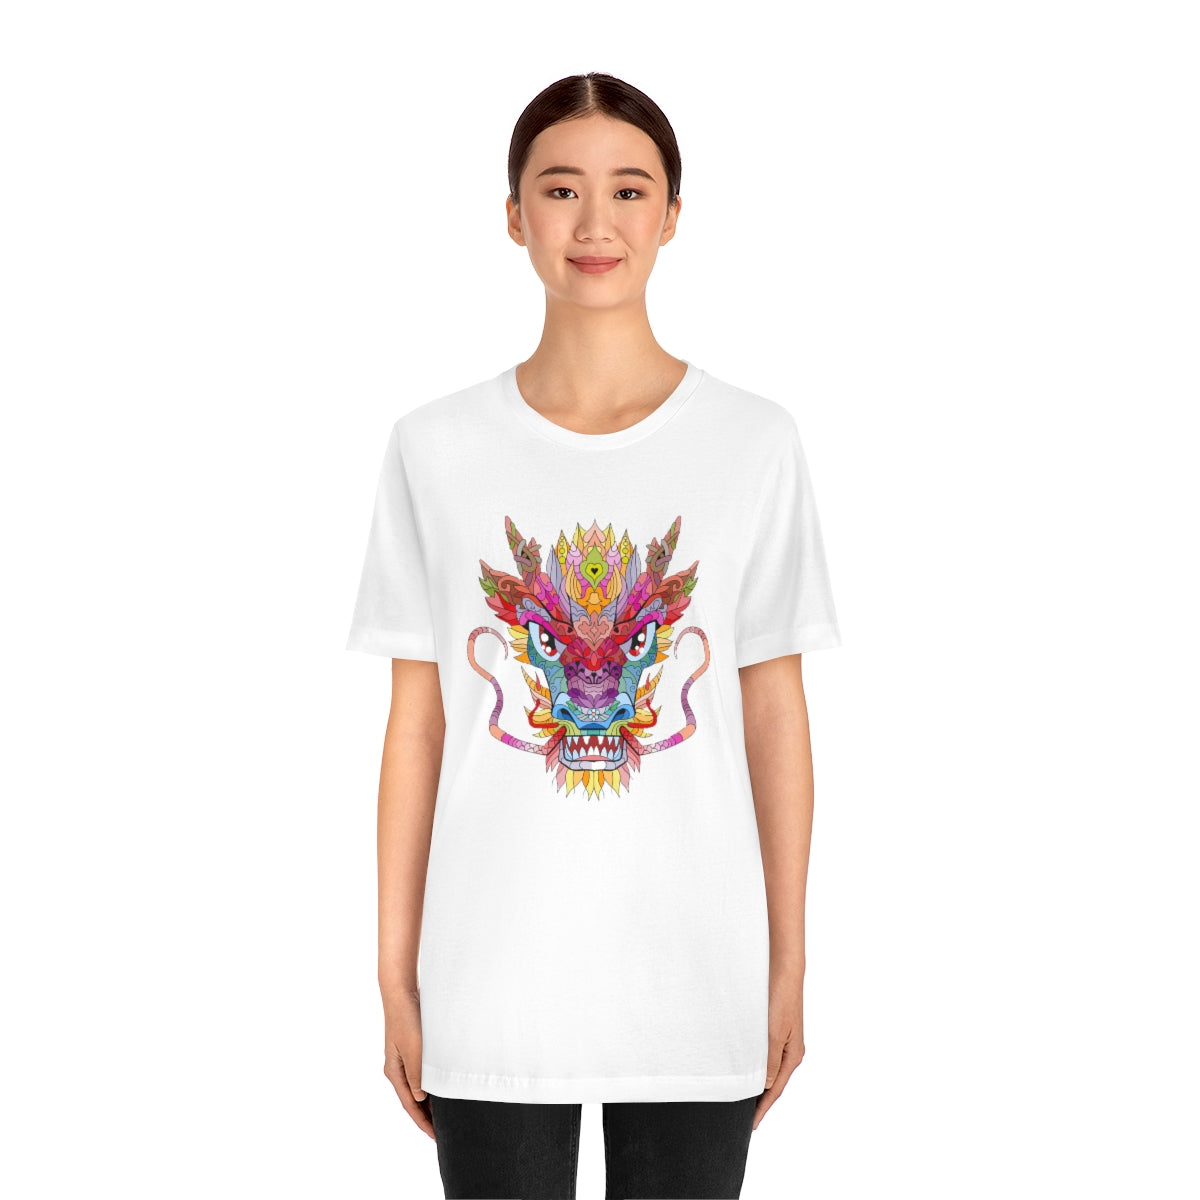 Unisex Jersey Short Sleeve Tee "Colorful red dragon ornament"